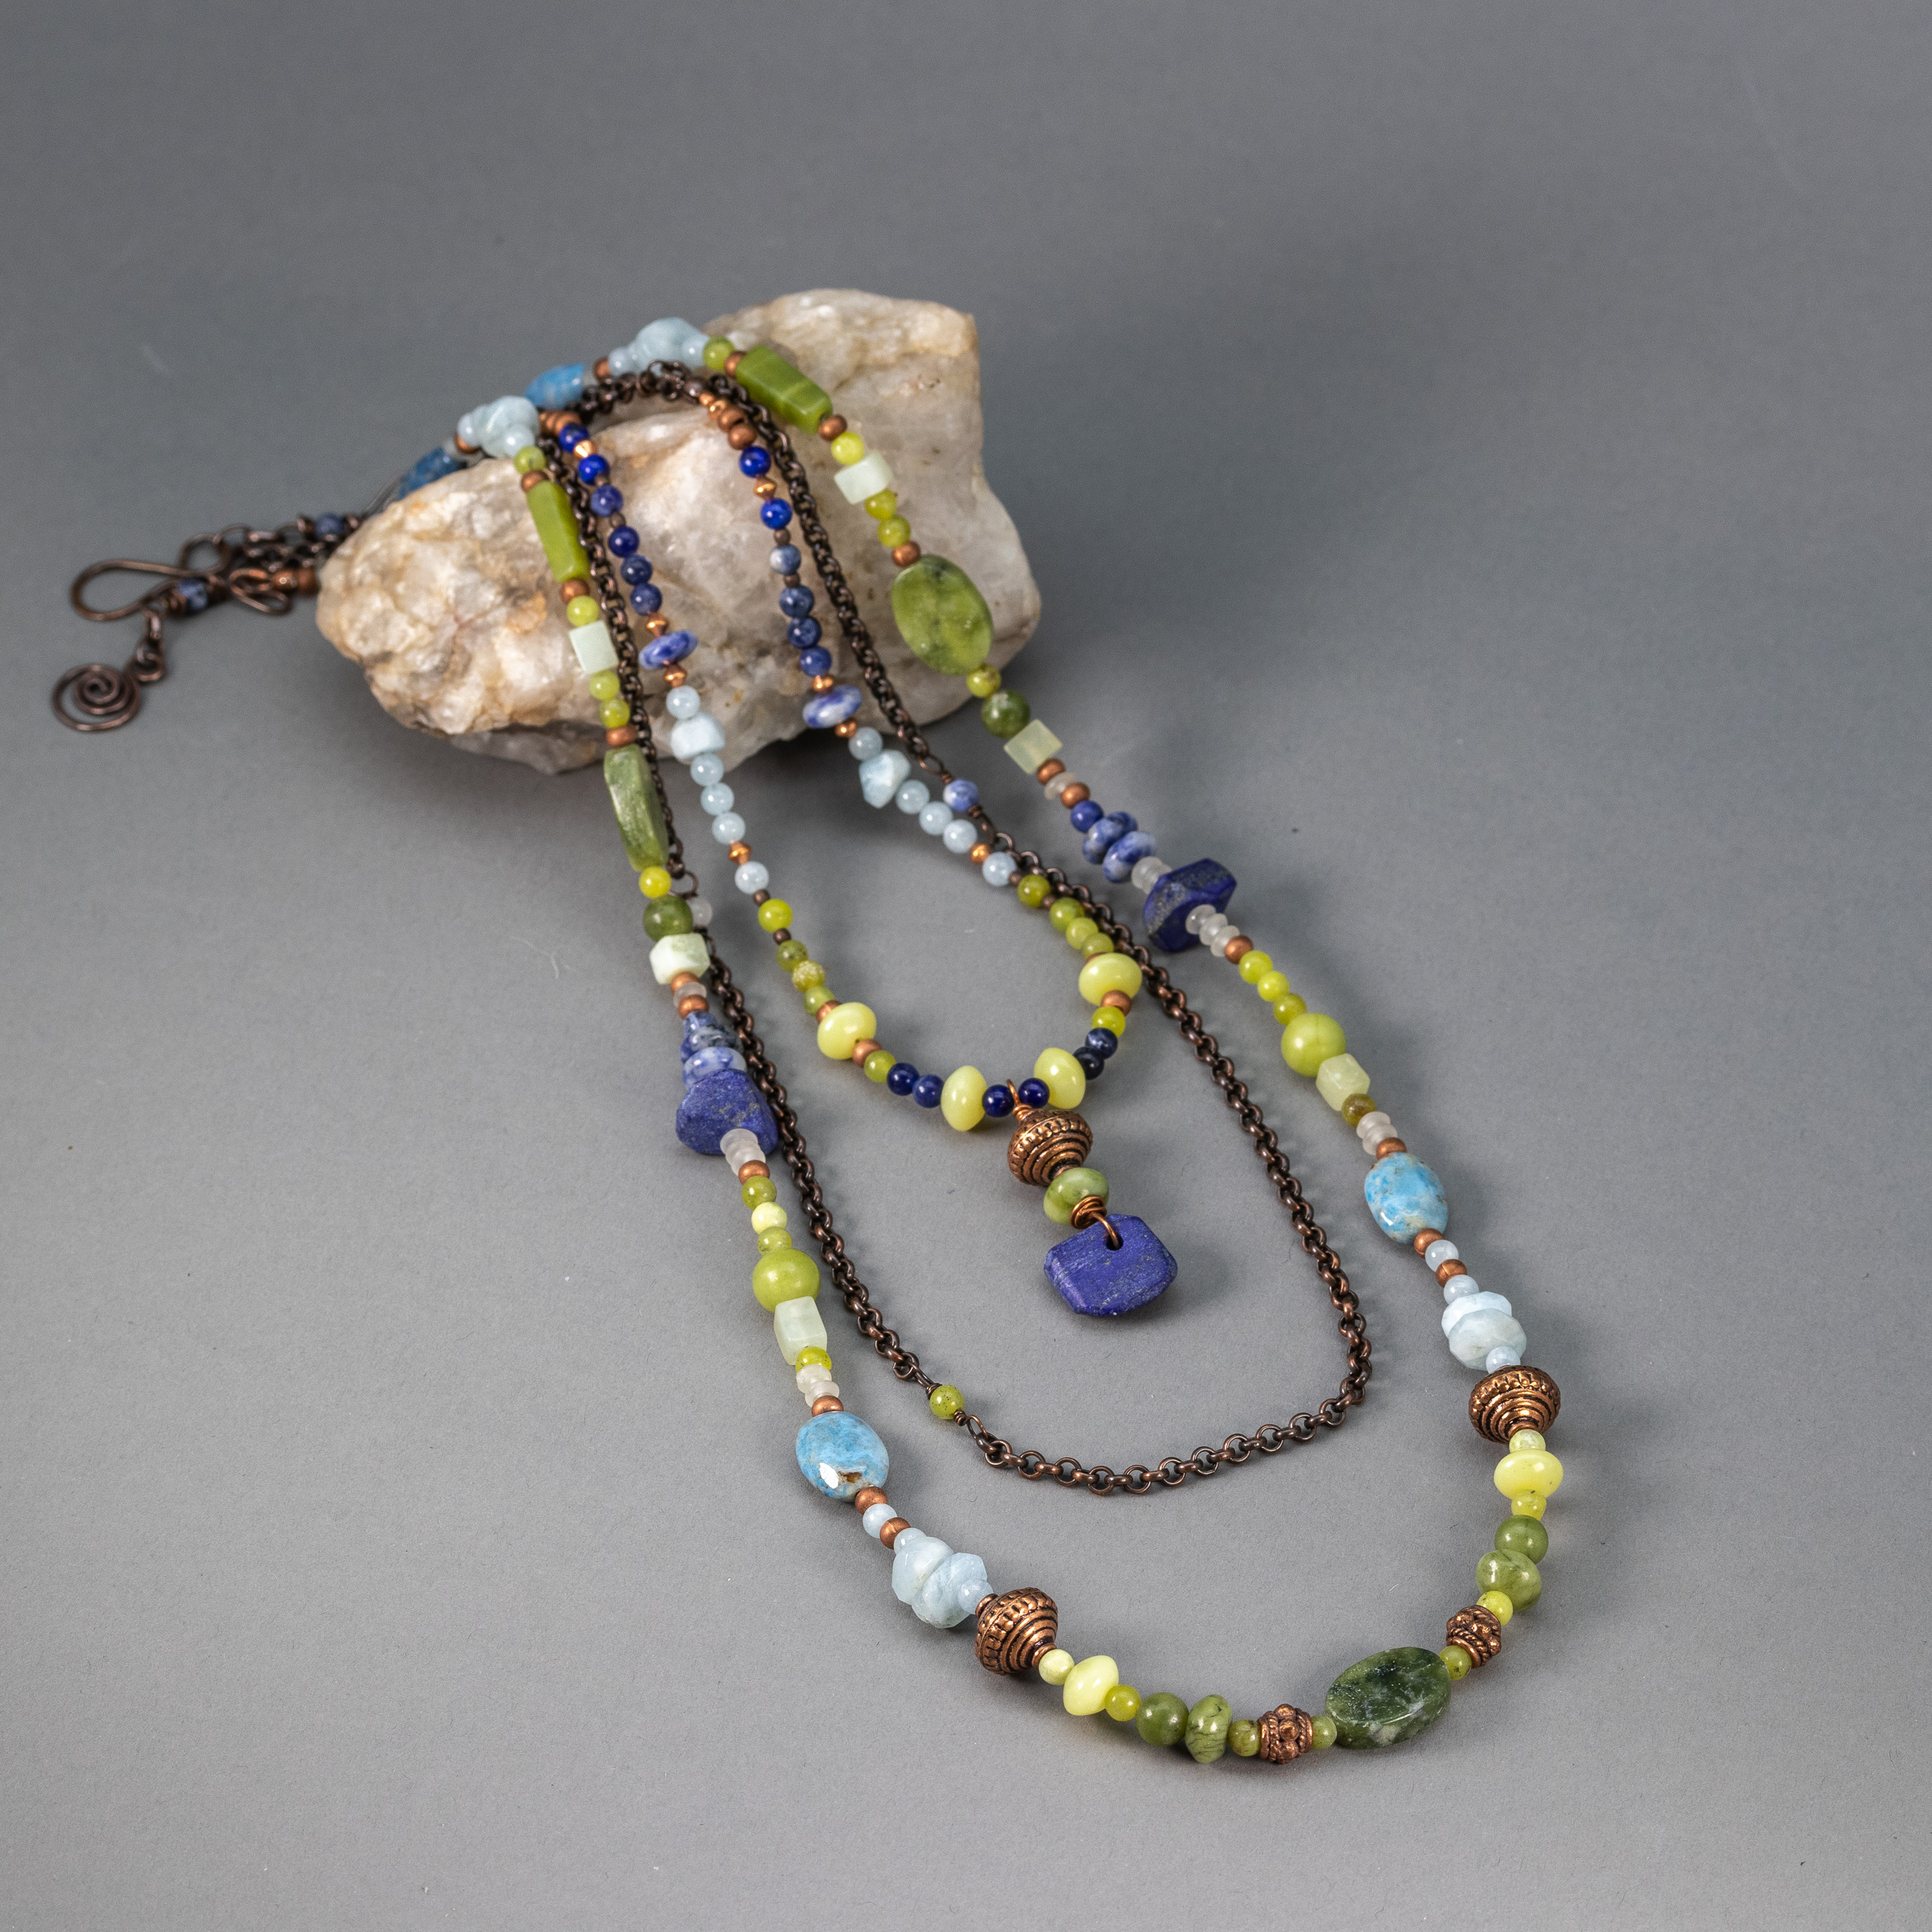 Blue Stone Layered Necklace Beaded ite Stone Double Horn Gift for Her 